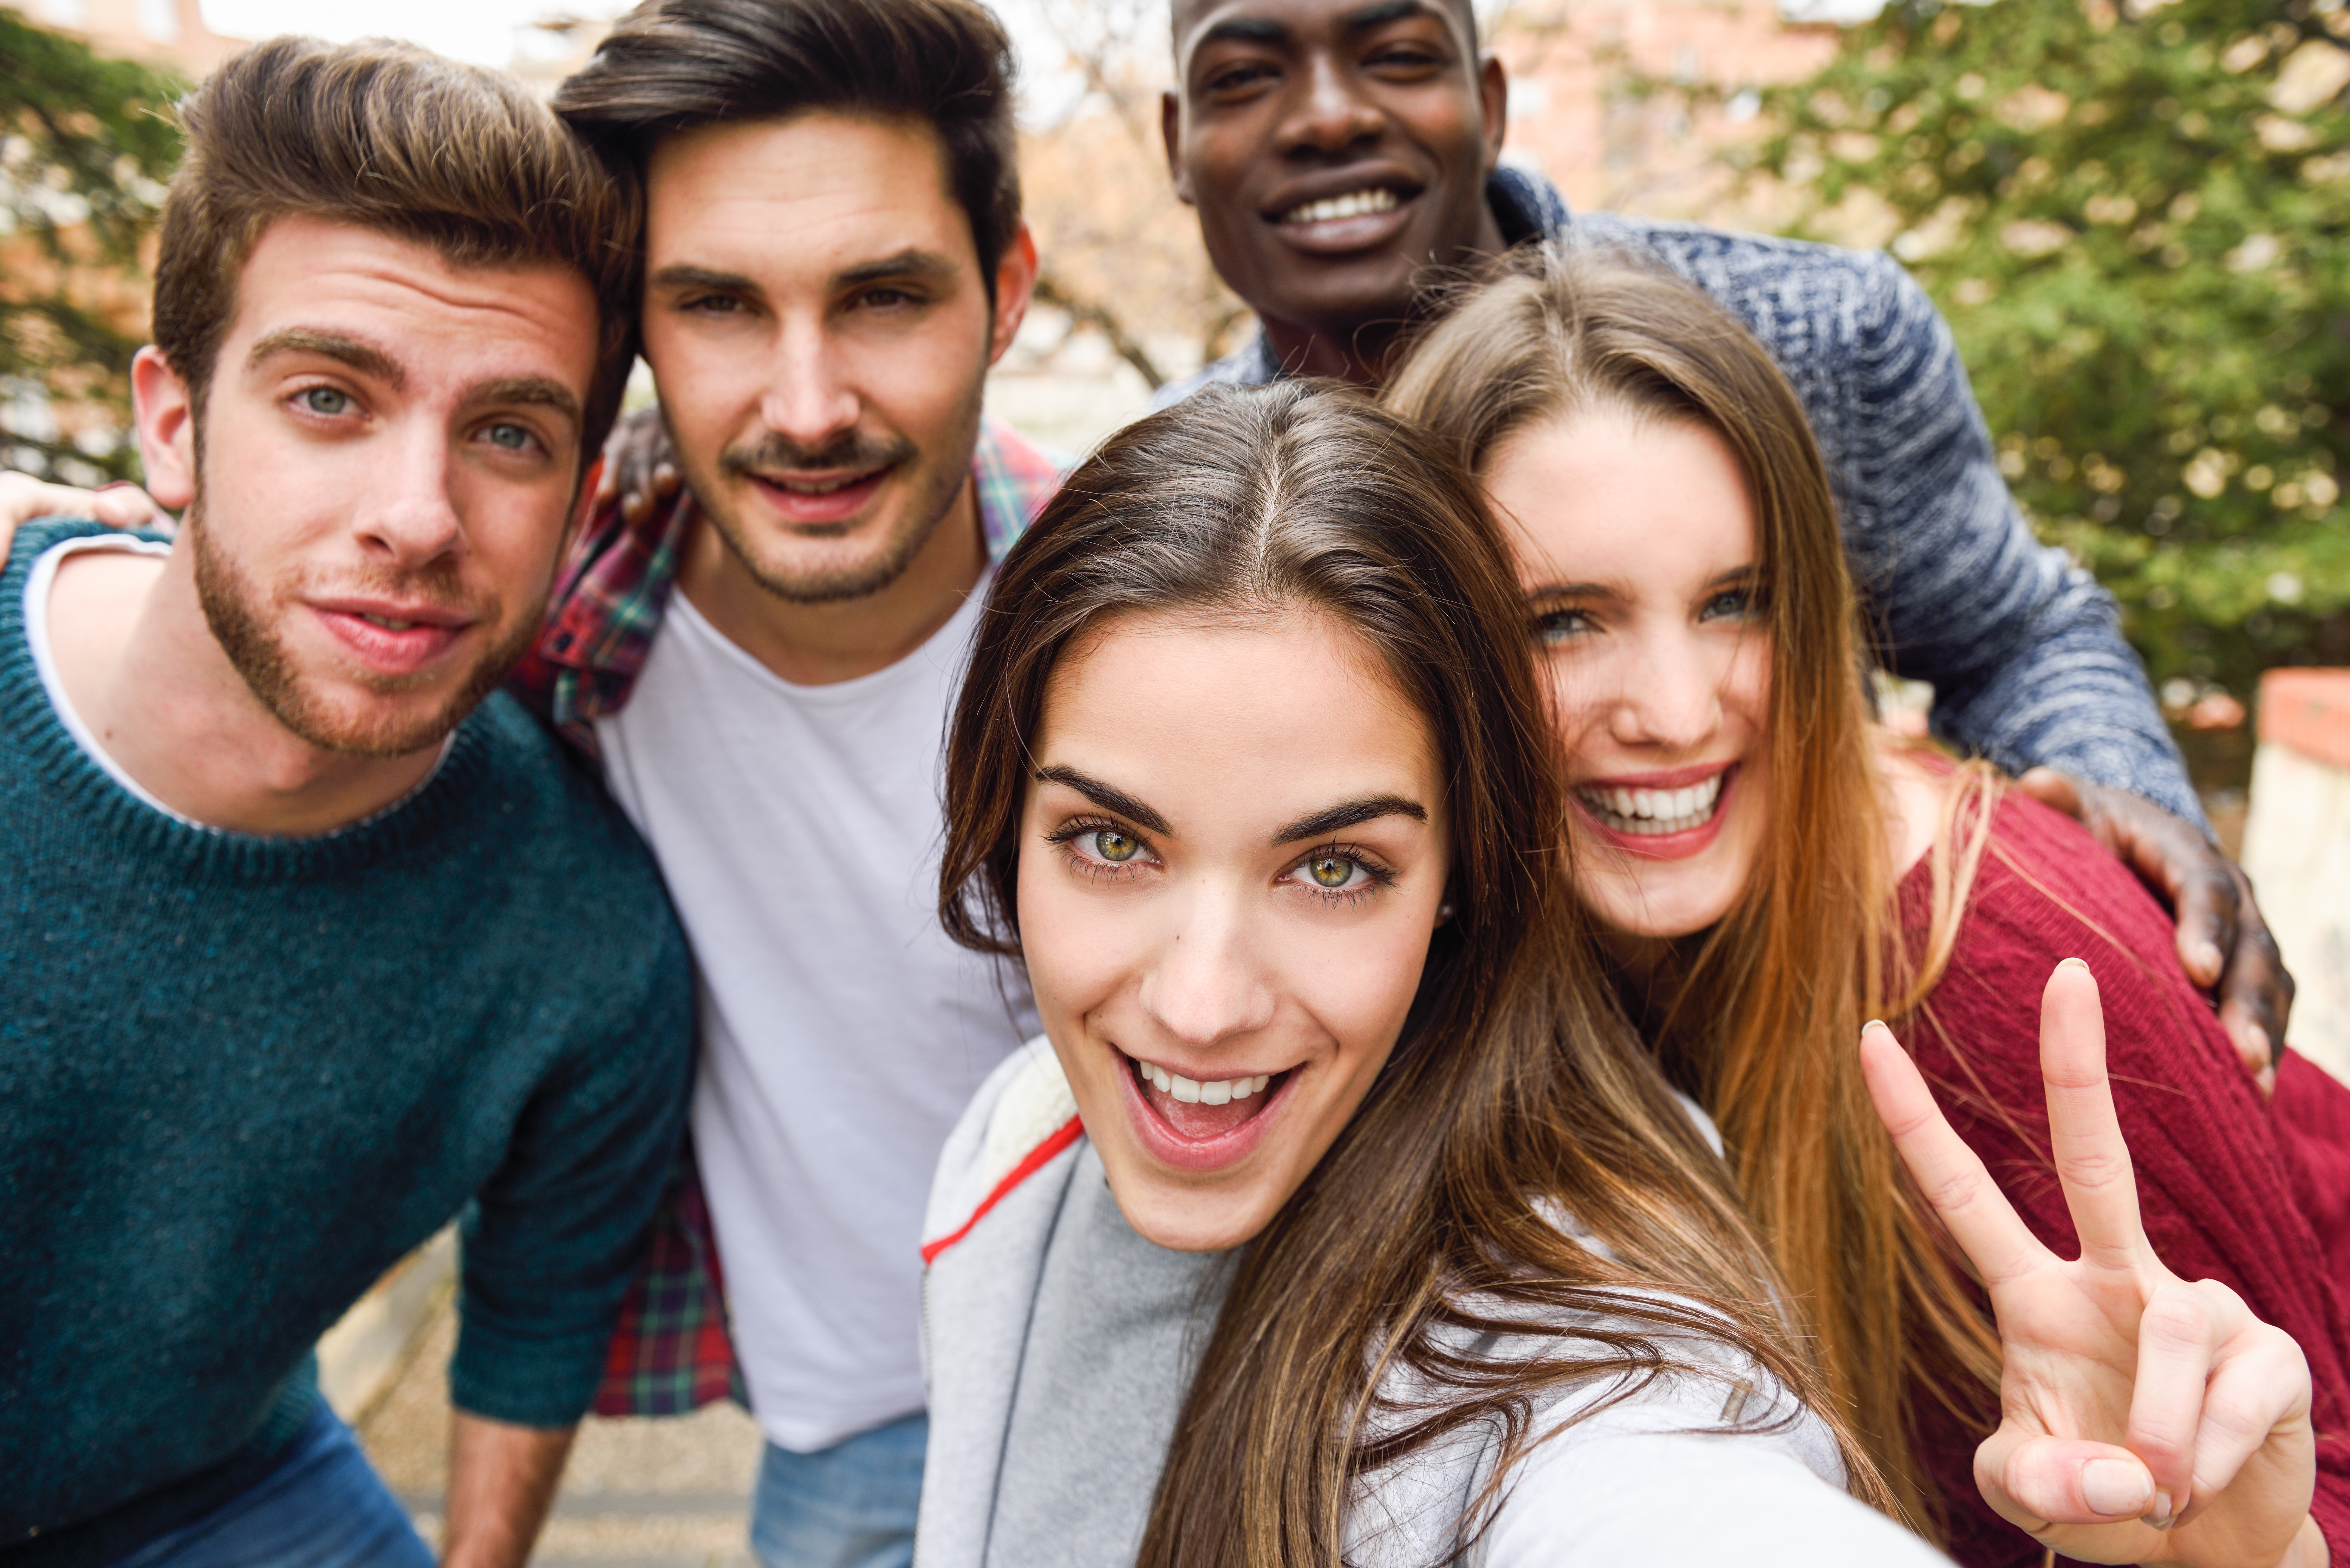  A group of five friends, three men and two women, are taking a selfie together outdoors.